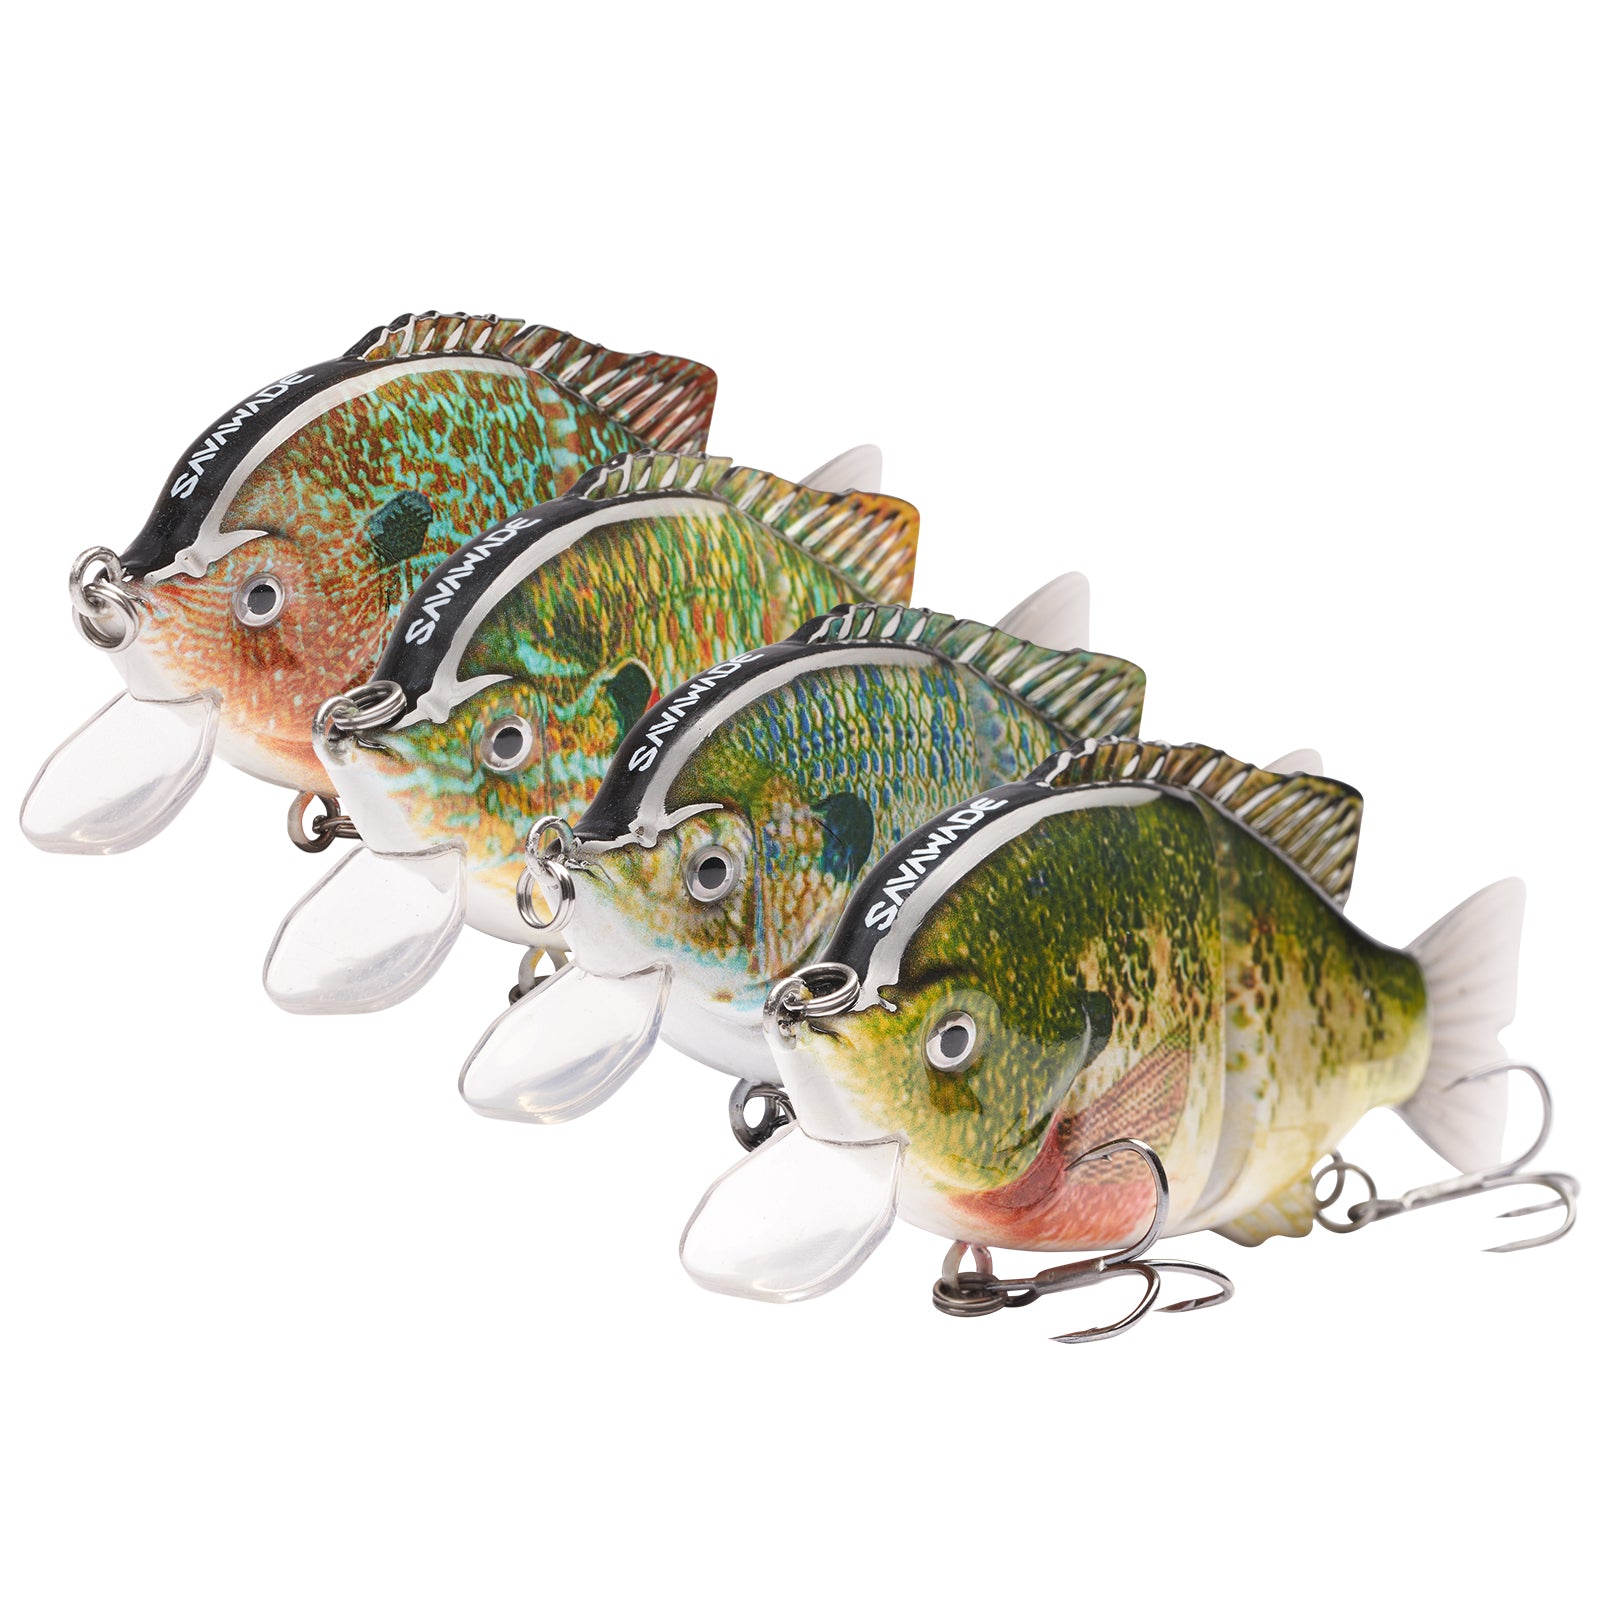 Premium Bass Weedless Bass Lures 10cm Length, 14g Weight, Multi Jointed  Swimbait, Lifelike Hard Bait For Topwater Fishing, Trout Perch From  Newvendor, $2.35